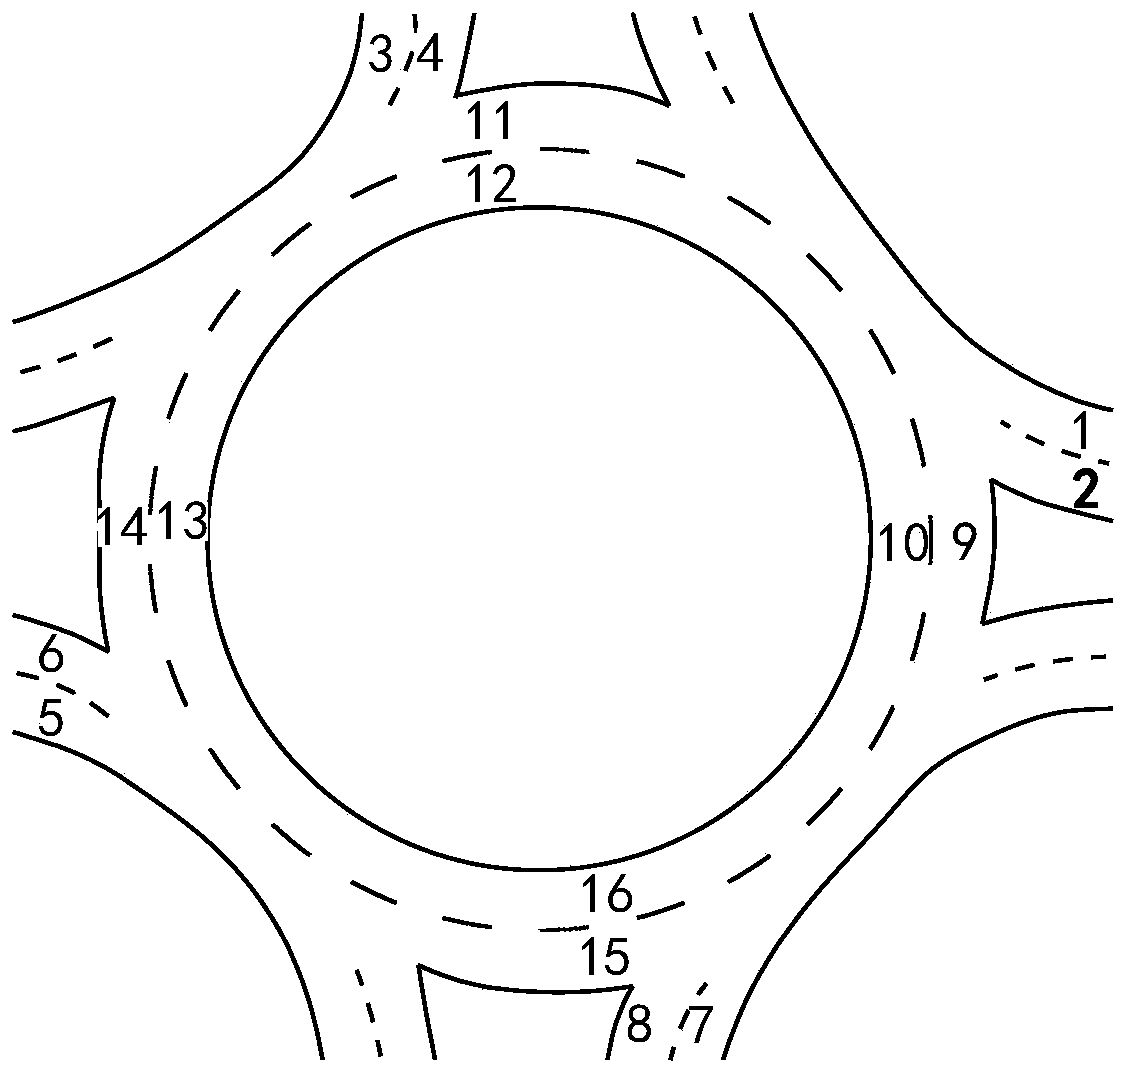 Modeling and Analysis Method of Roundabout Traffic Capacity